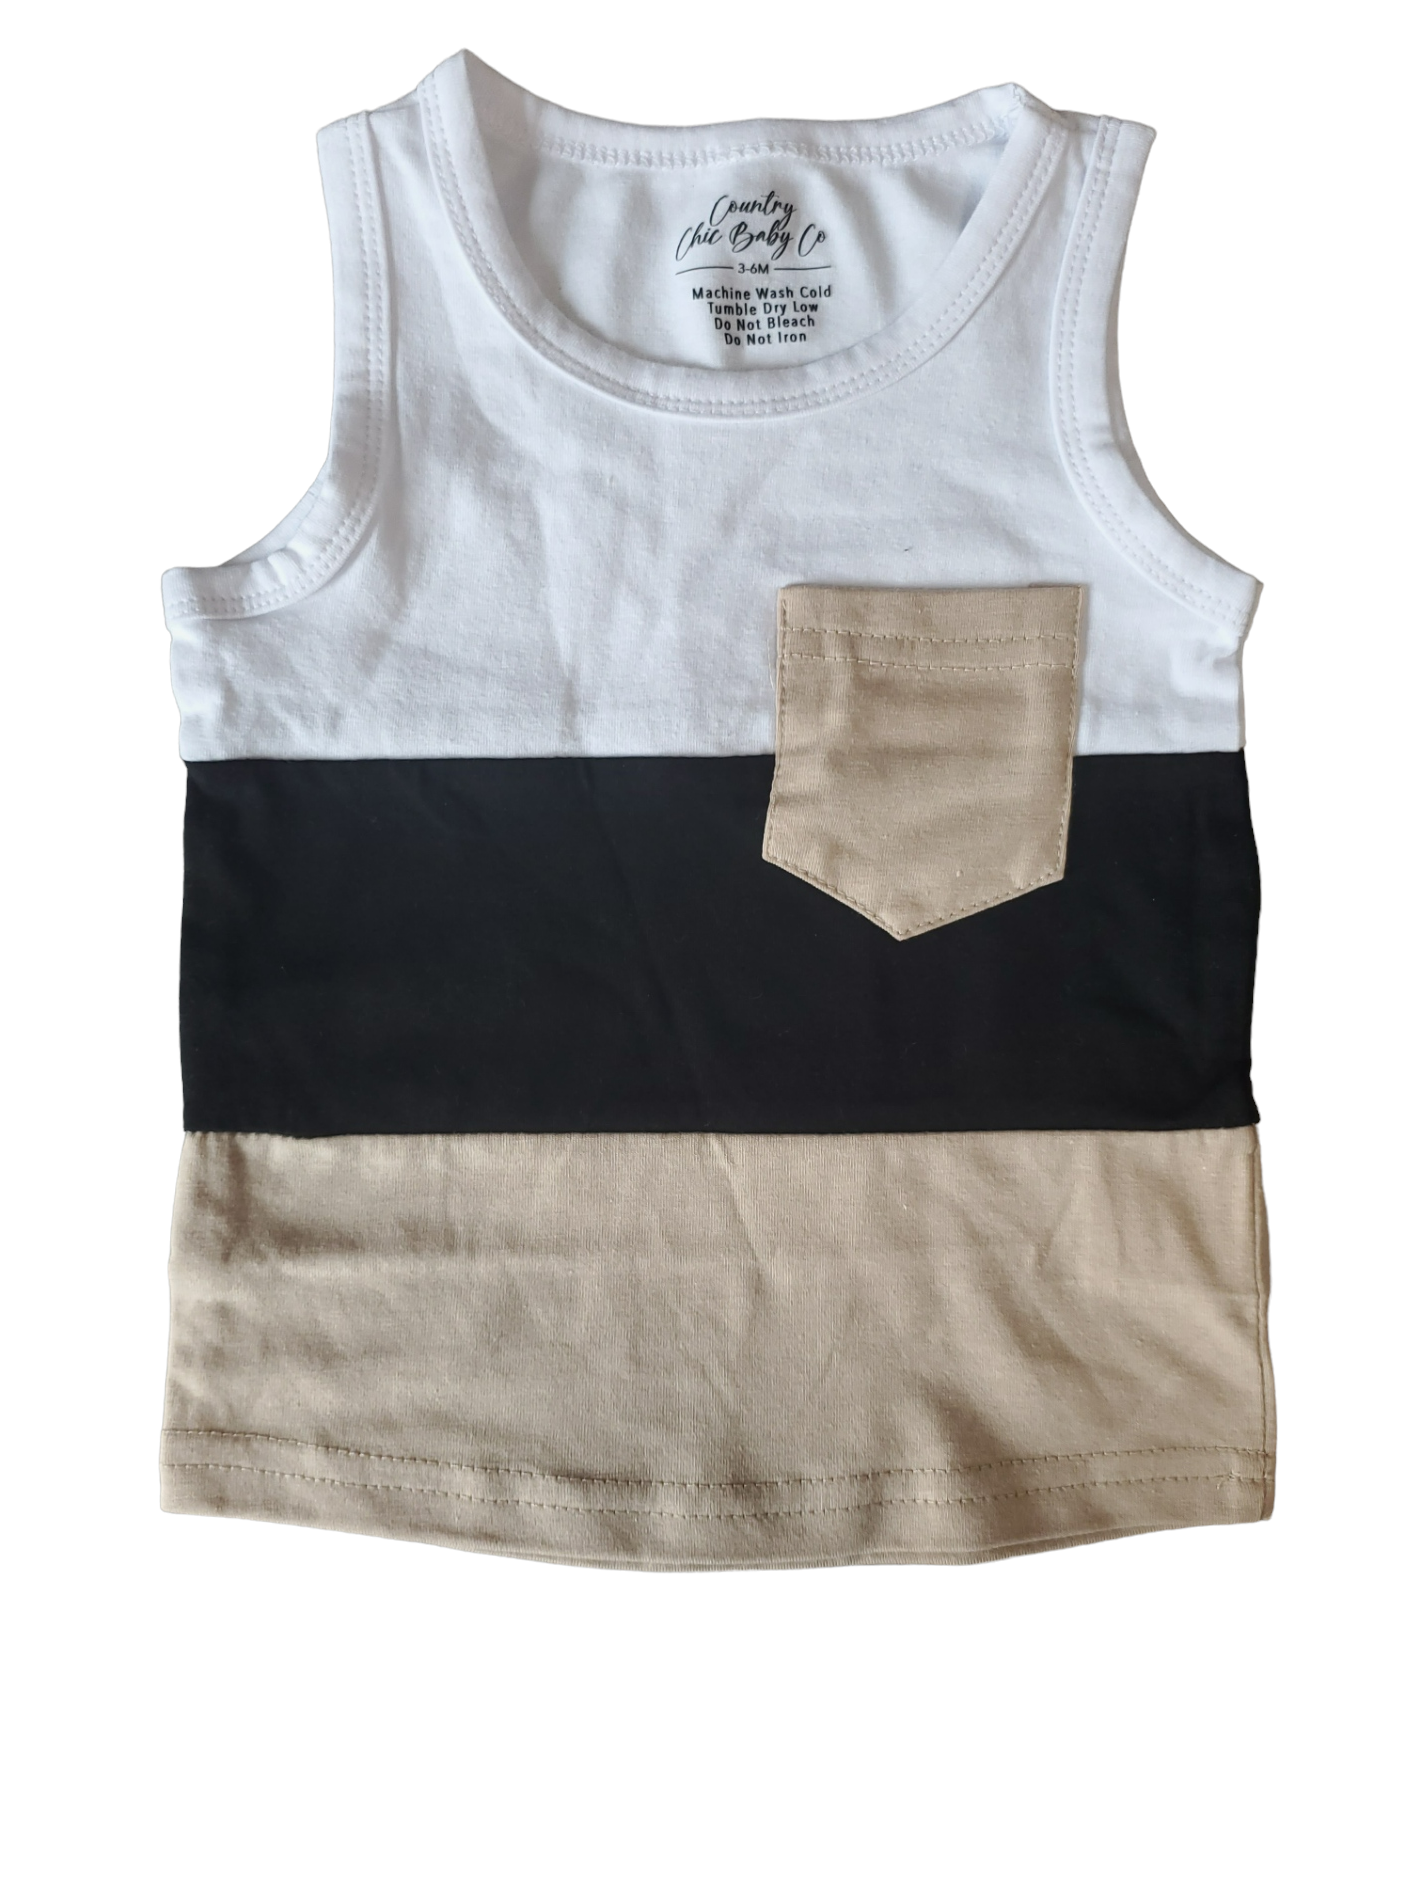 Infant Boys Summer Fit Black and Tan